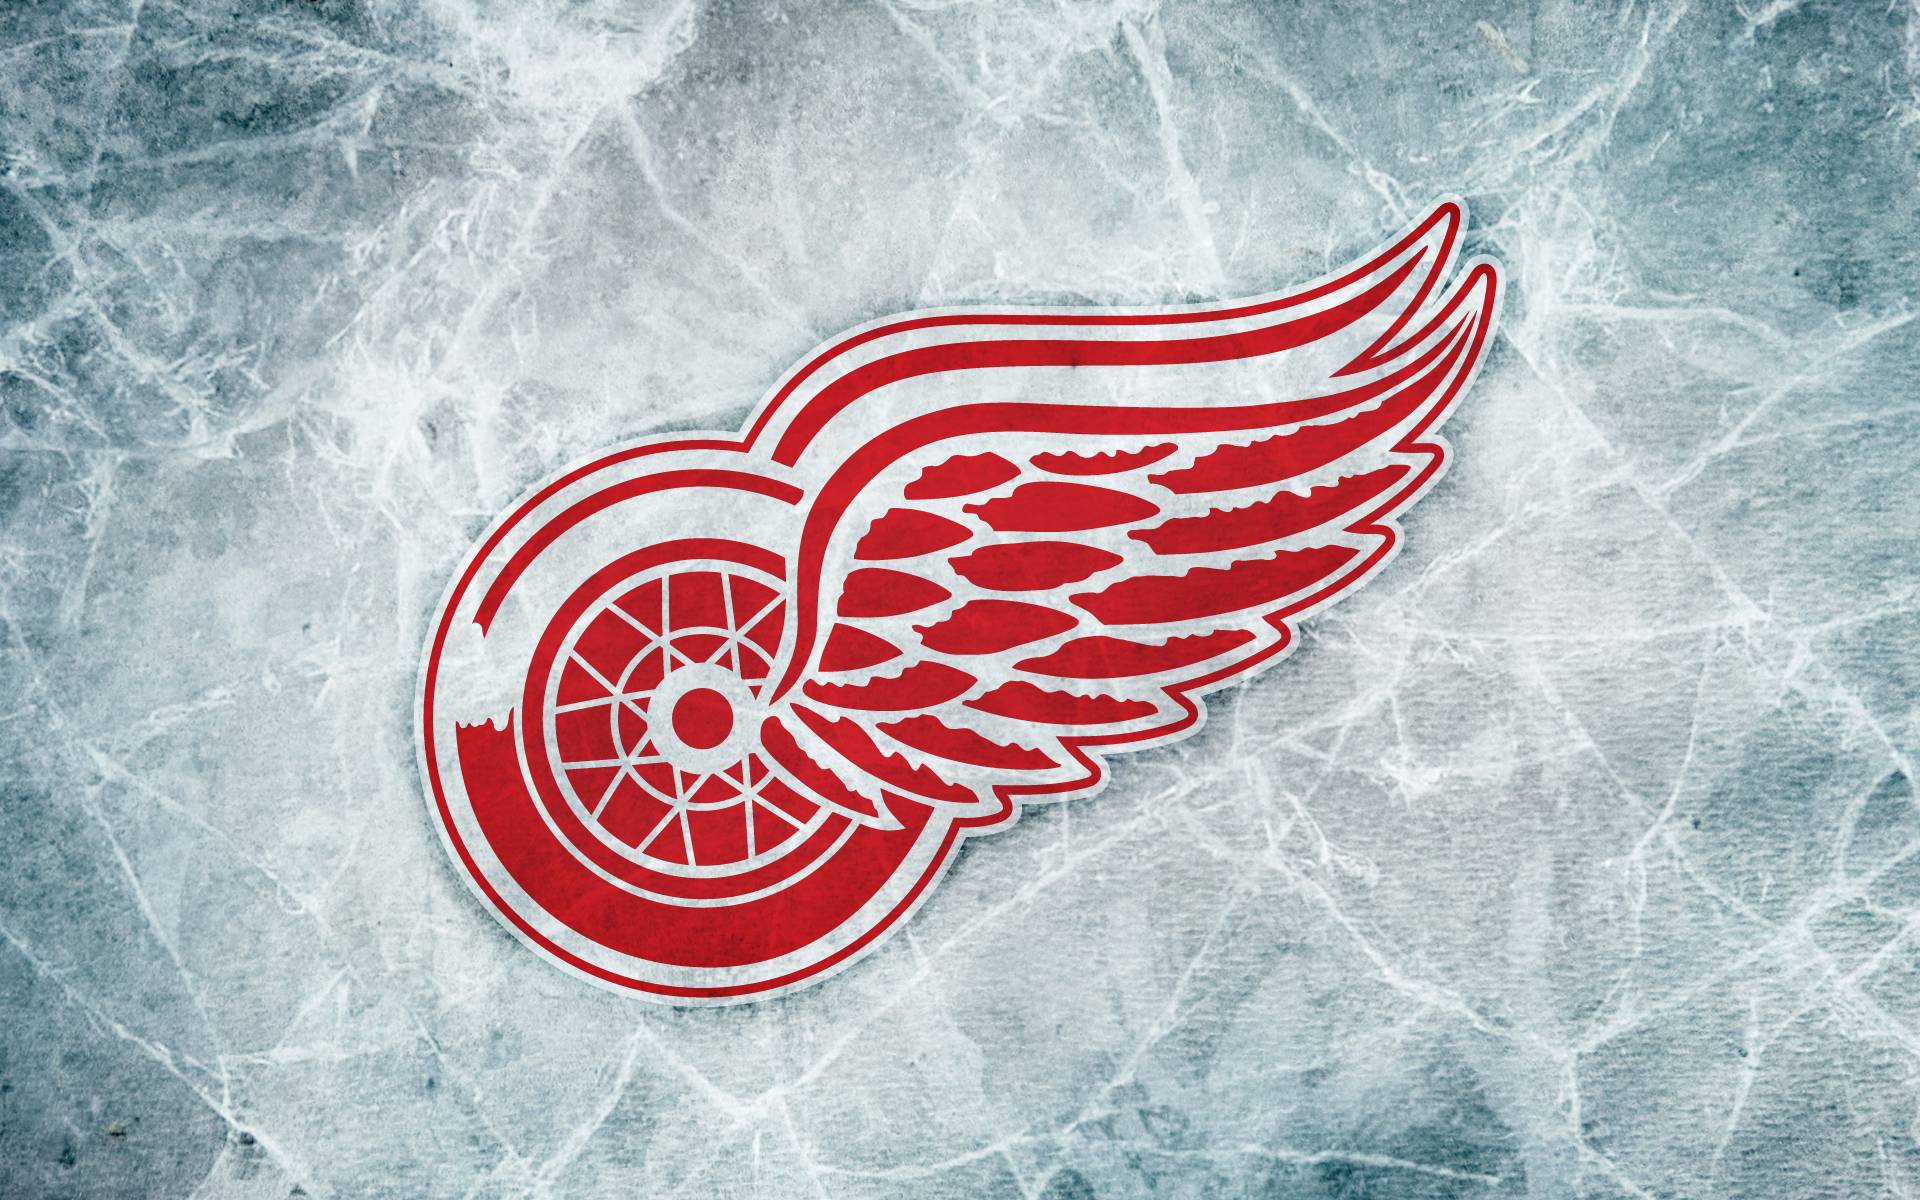 Detroit Red Wings Wallpaper. Detroit Red Wings Background